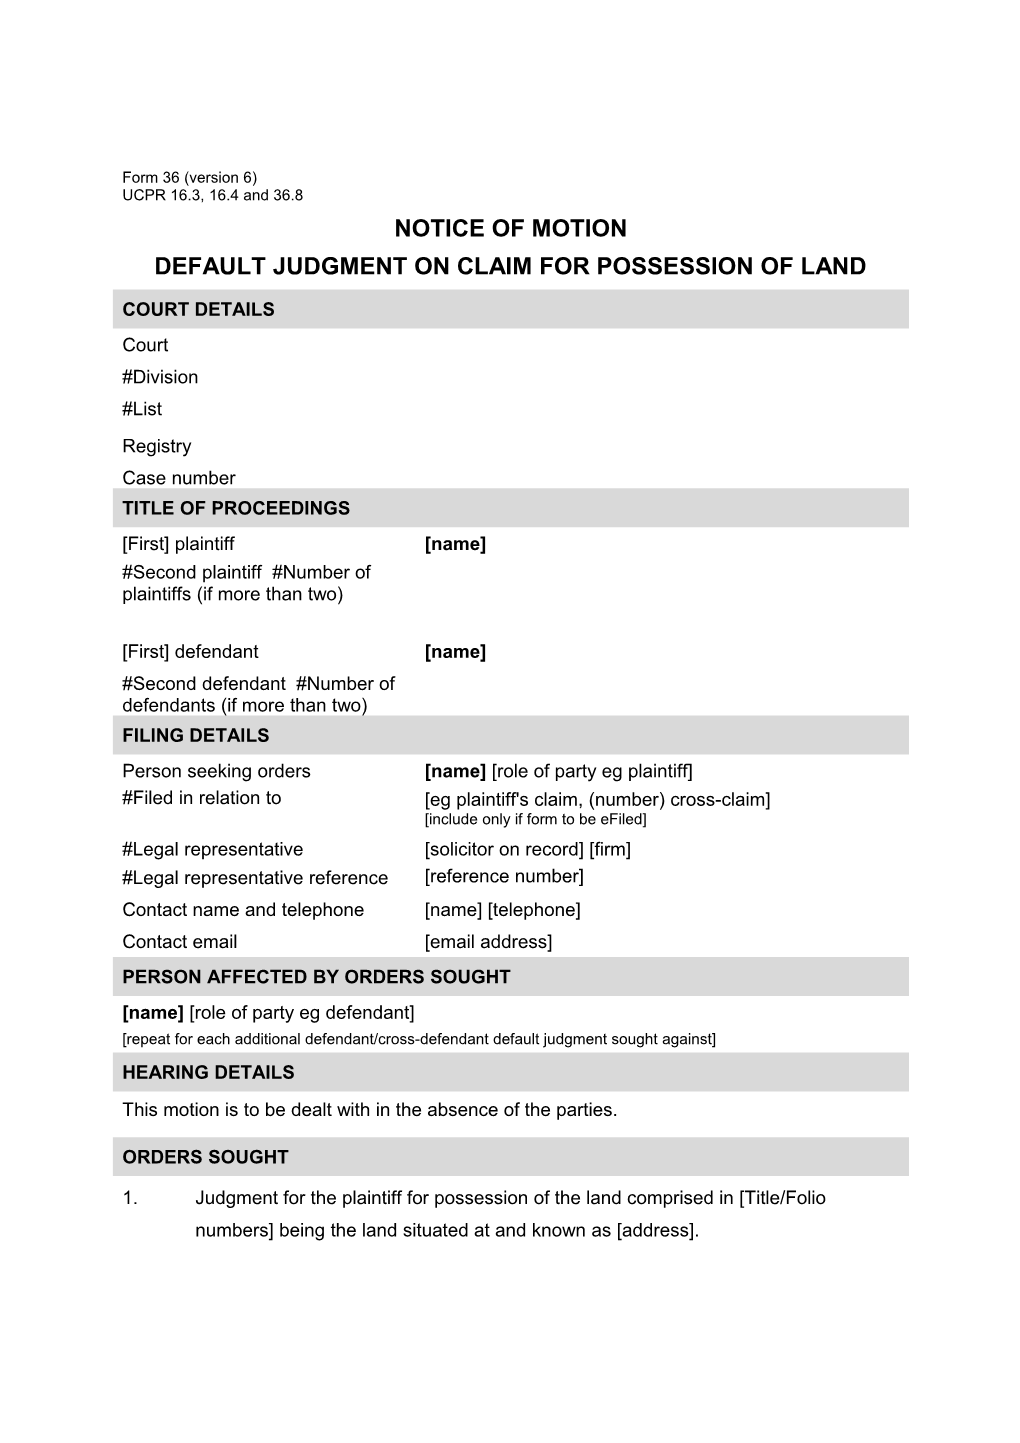 Form 36 - Notice of Motion - Default Judgment on Claim for Possession of Land